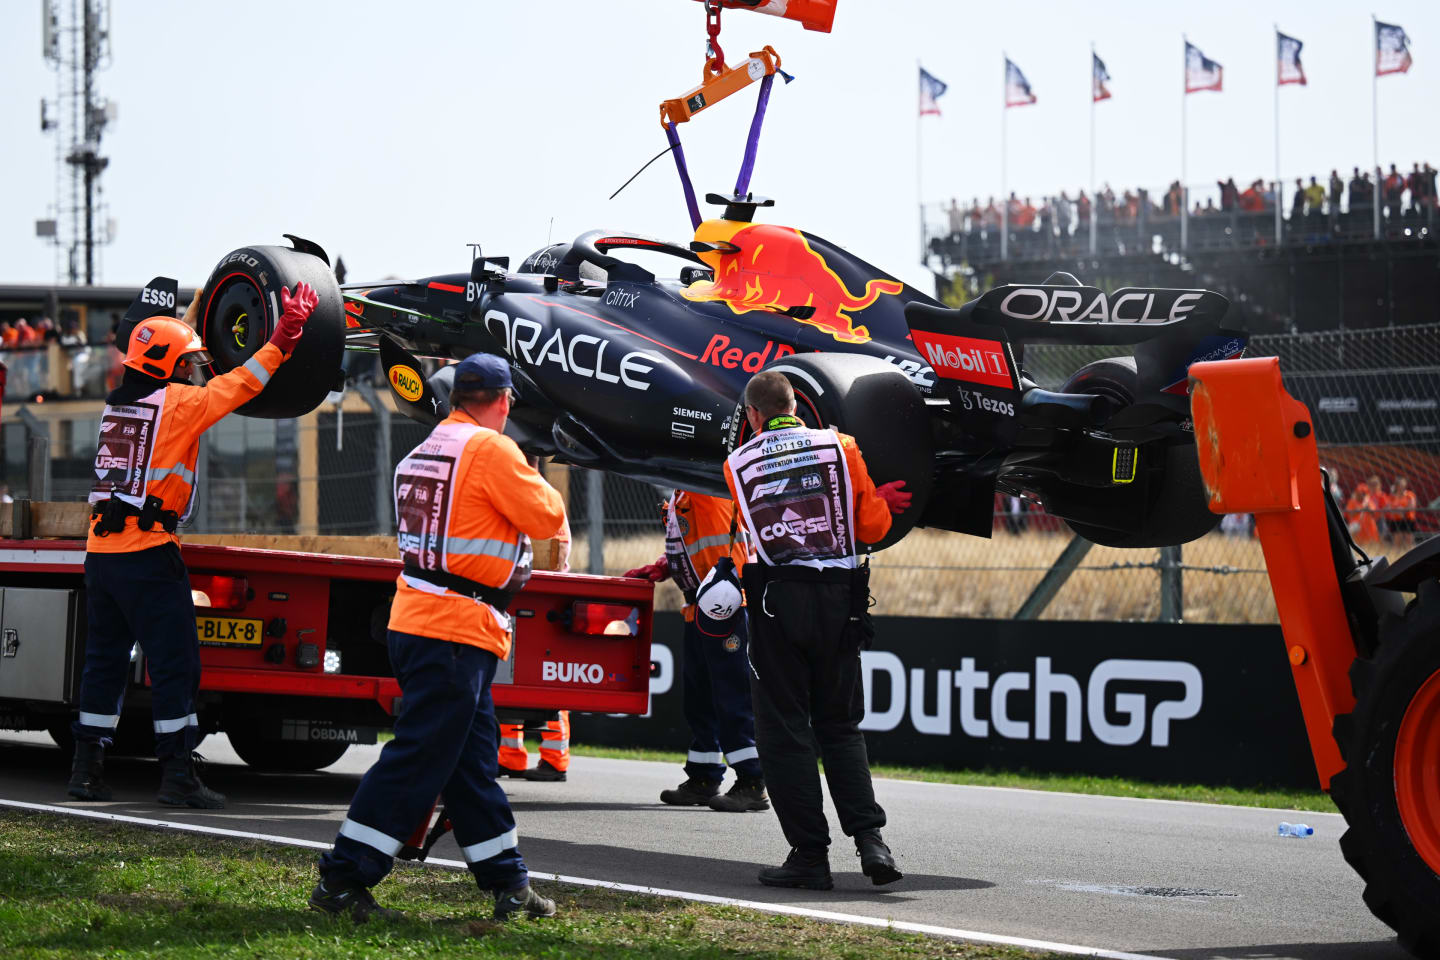 ZANDVOORT, NETHERLANDS - SEPTEMBER 02: The car of Max Verstappen of the Netherlands and Oracle Red Bull Racing is removed from the track during practice ahead of the F1 Grand Prix of The Netherlands at Circuit Zandvoort on September 02, 2022 in Zandvoort, Netherlands. (Photo by Clive Mason/Getty Images)